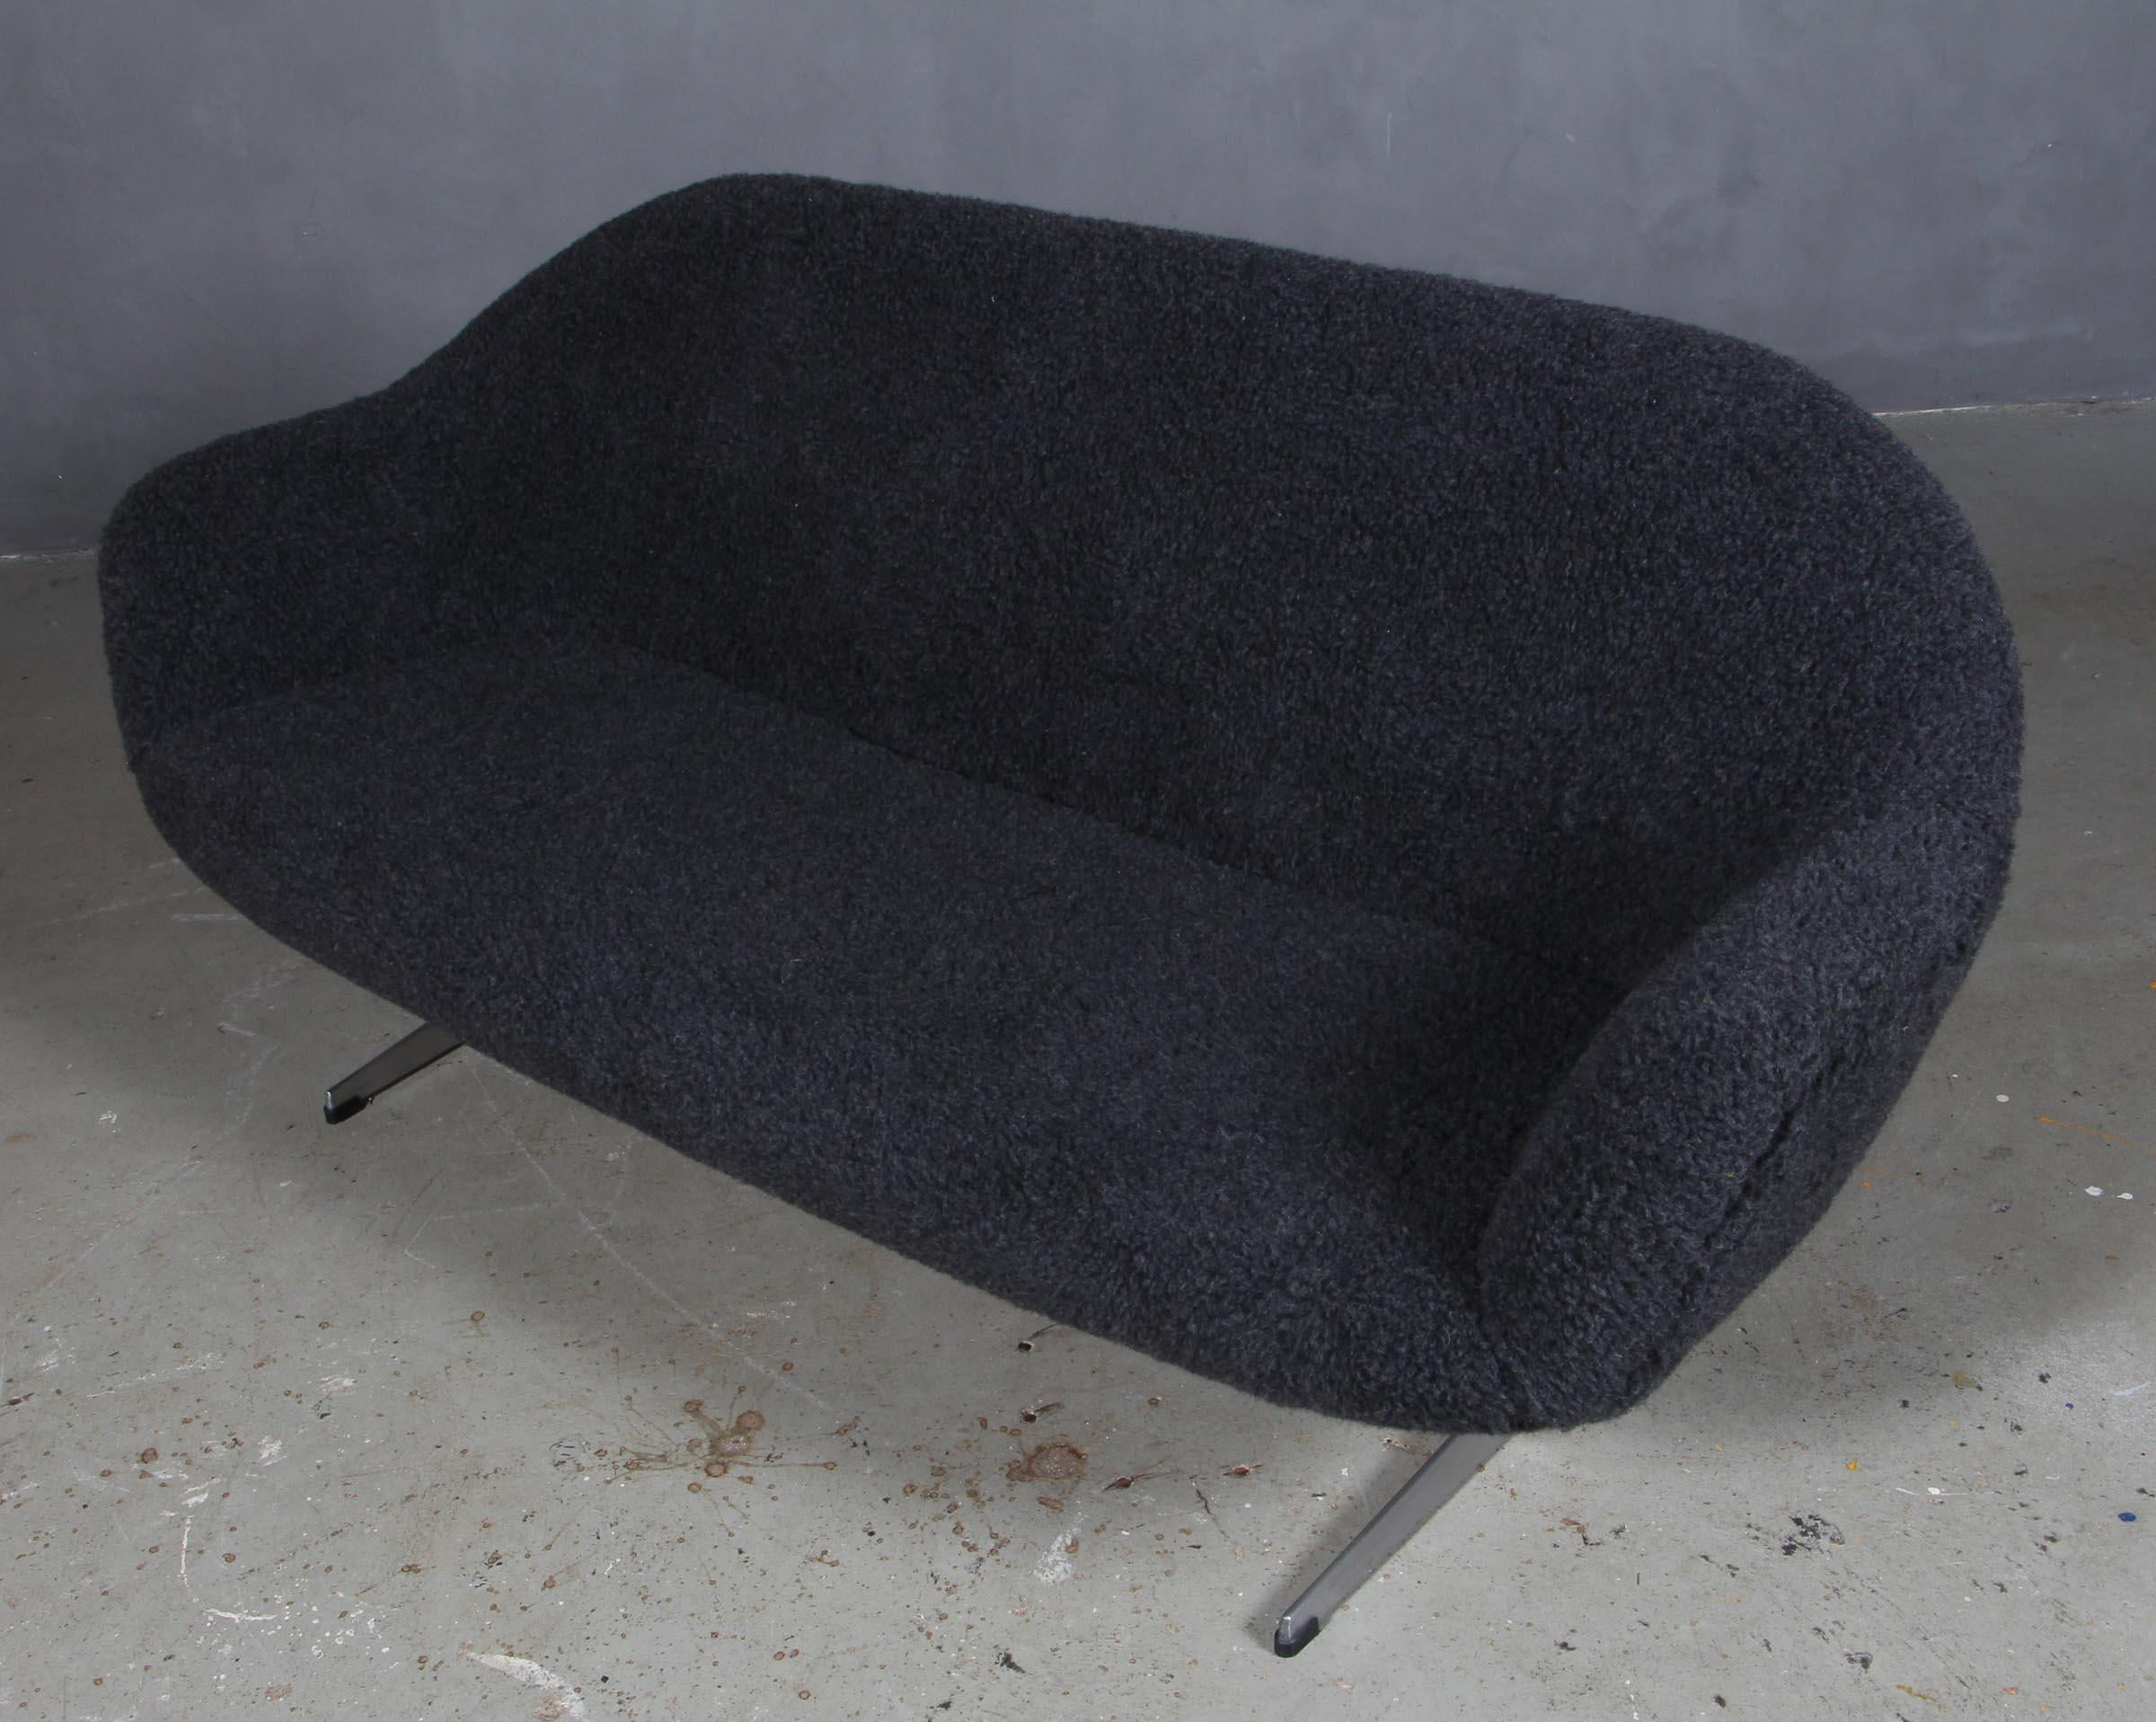 Danish cabinetmaker two½-seat sofa new upholstered with lambwool.

Shakerbase of steel.

Made in the 1970s.